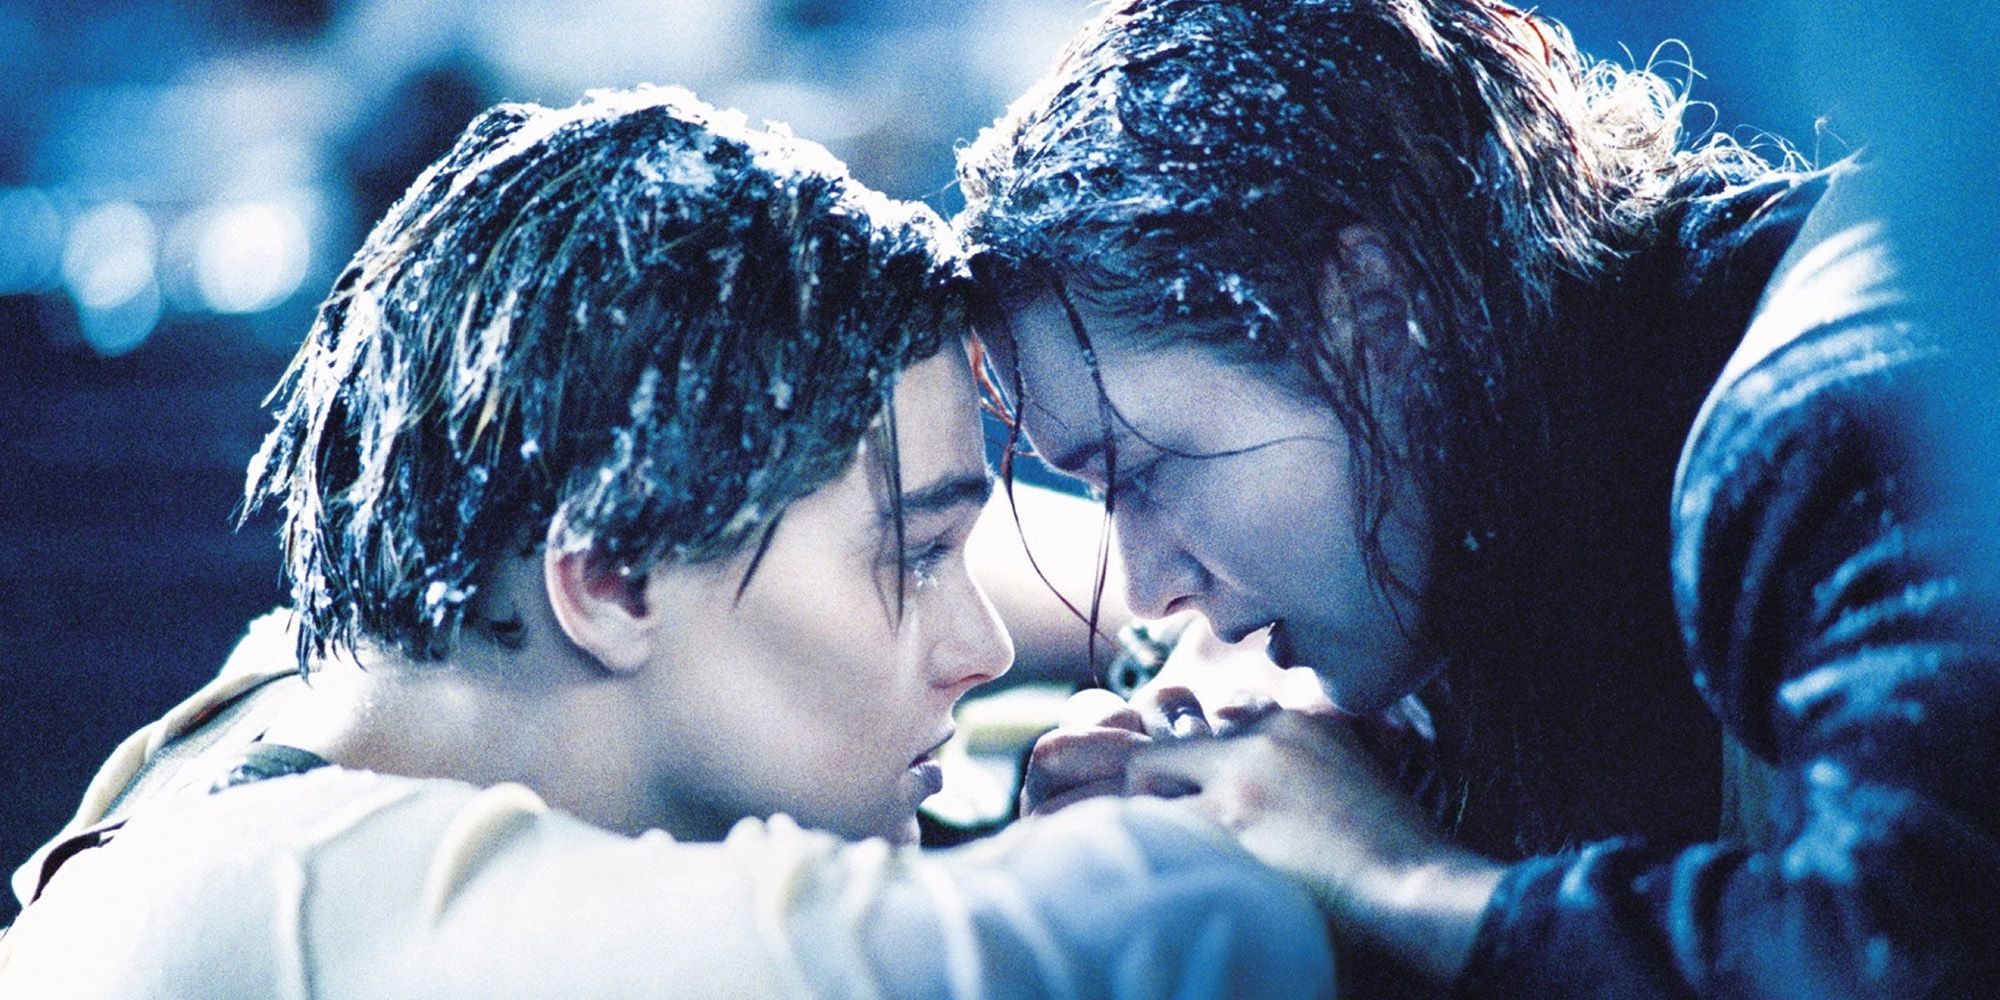 Kate Winslet and Leonardo DiCaprio in the water in the Titanic movie